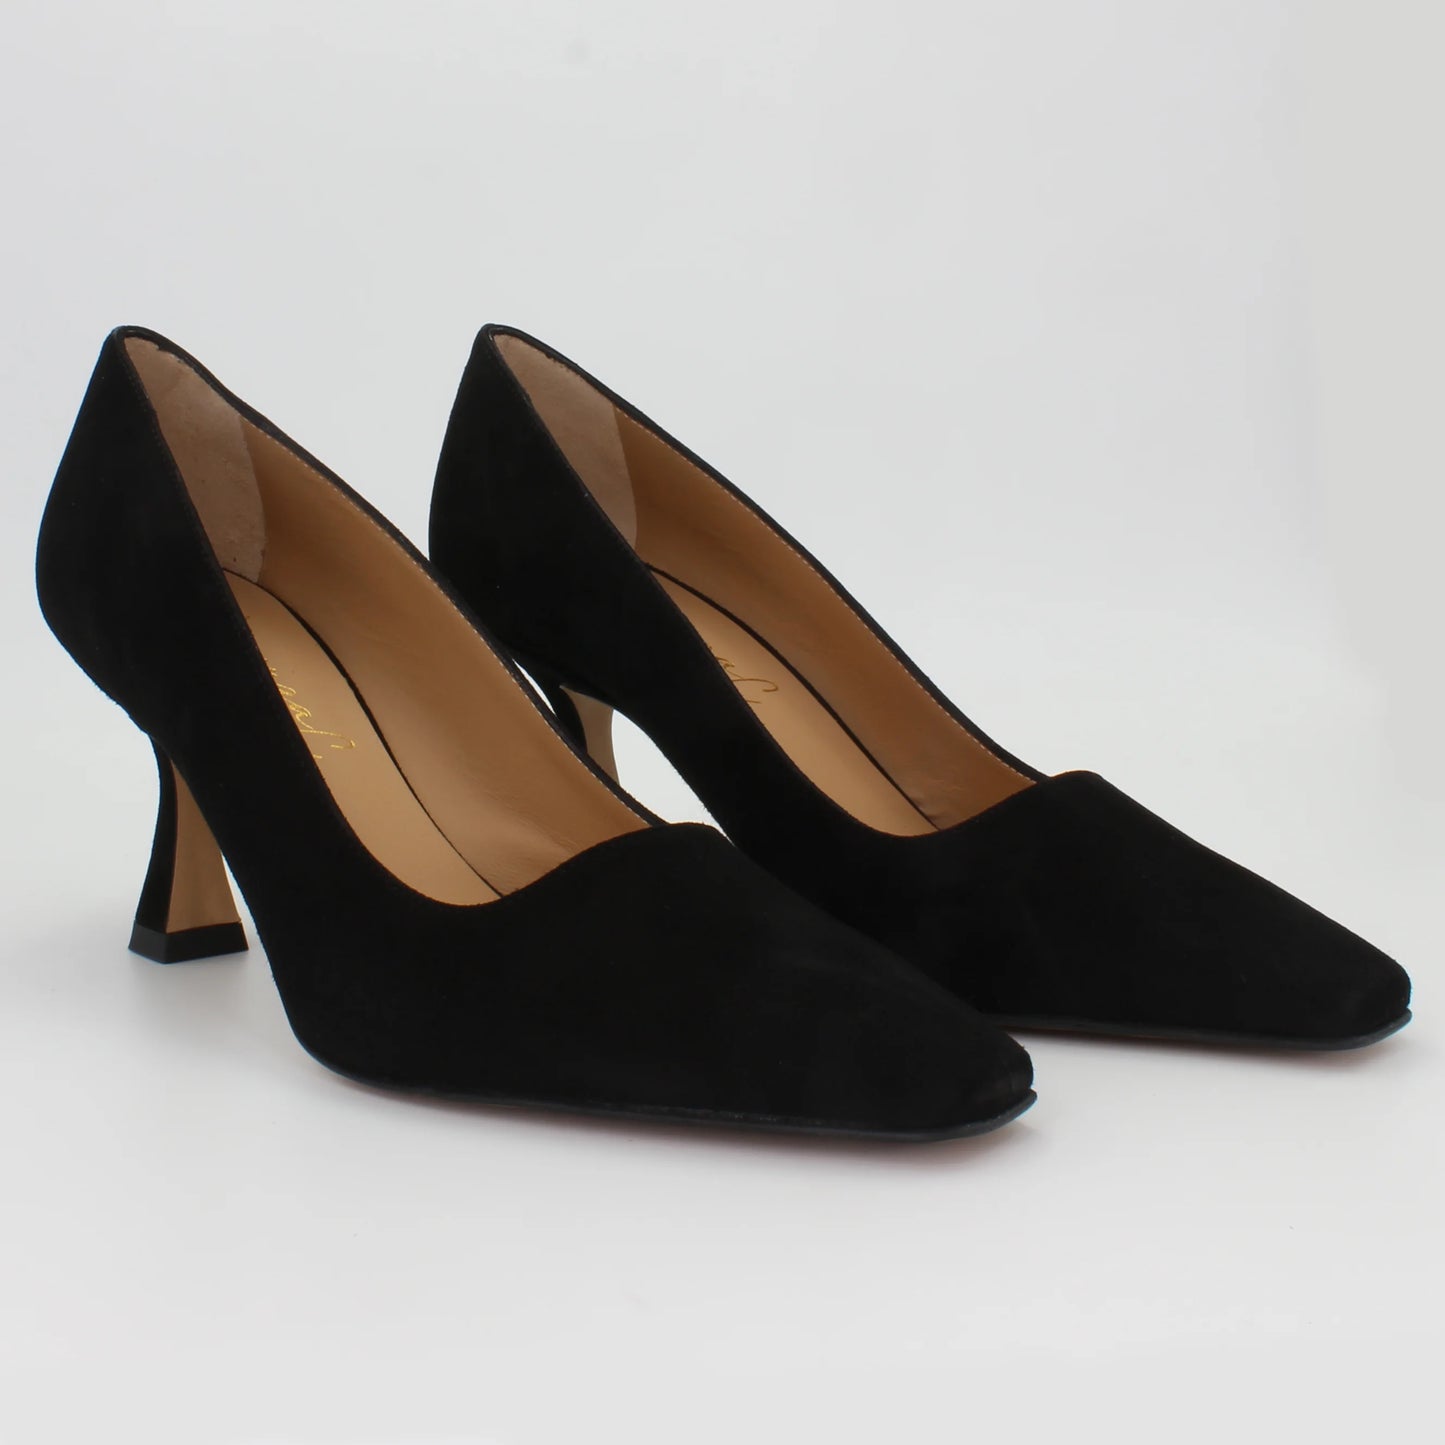 Shop Handmade Italian Leather Suede Heel in Nero (V51) or browse our range of hand-made Italian shoes for women in leather or suede in-store at Aliverti Cape Town, or shop online. We deliver in South Africa & offer multiple payment plans as well as accept multiple safe & secure payment methods.